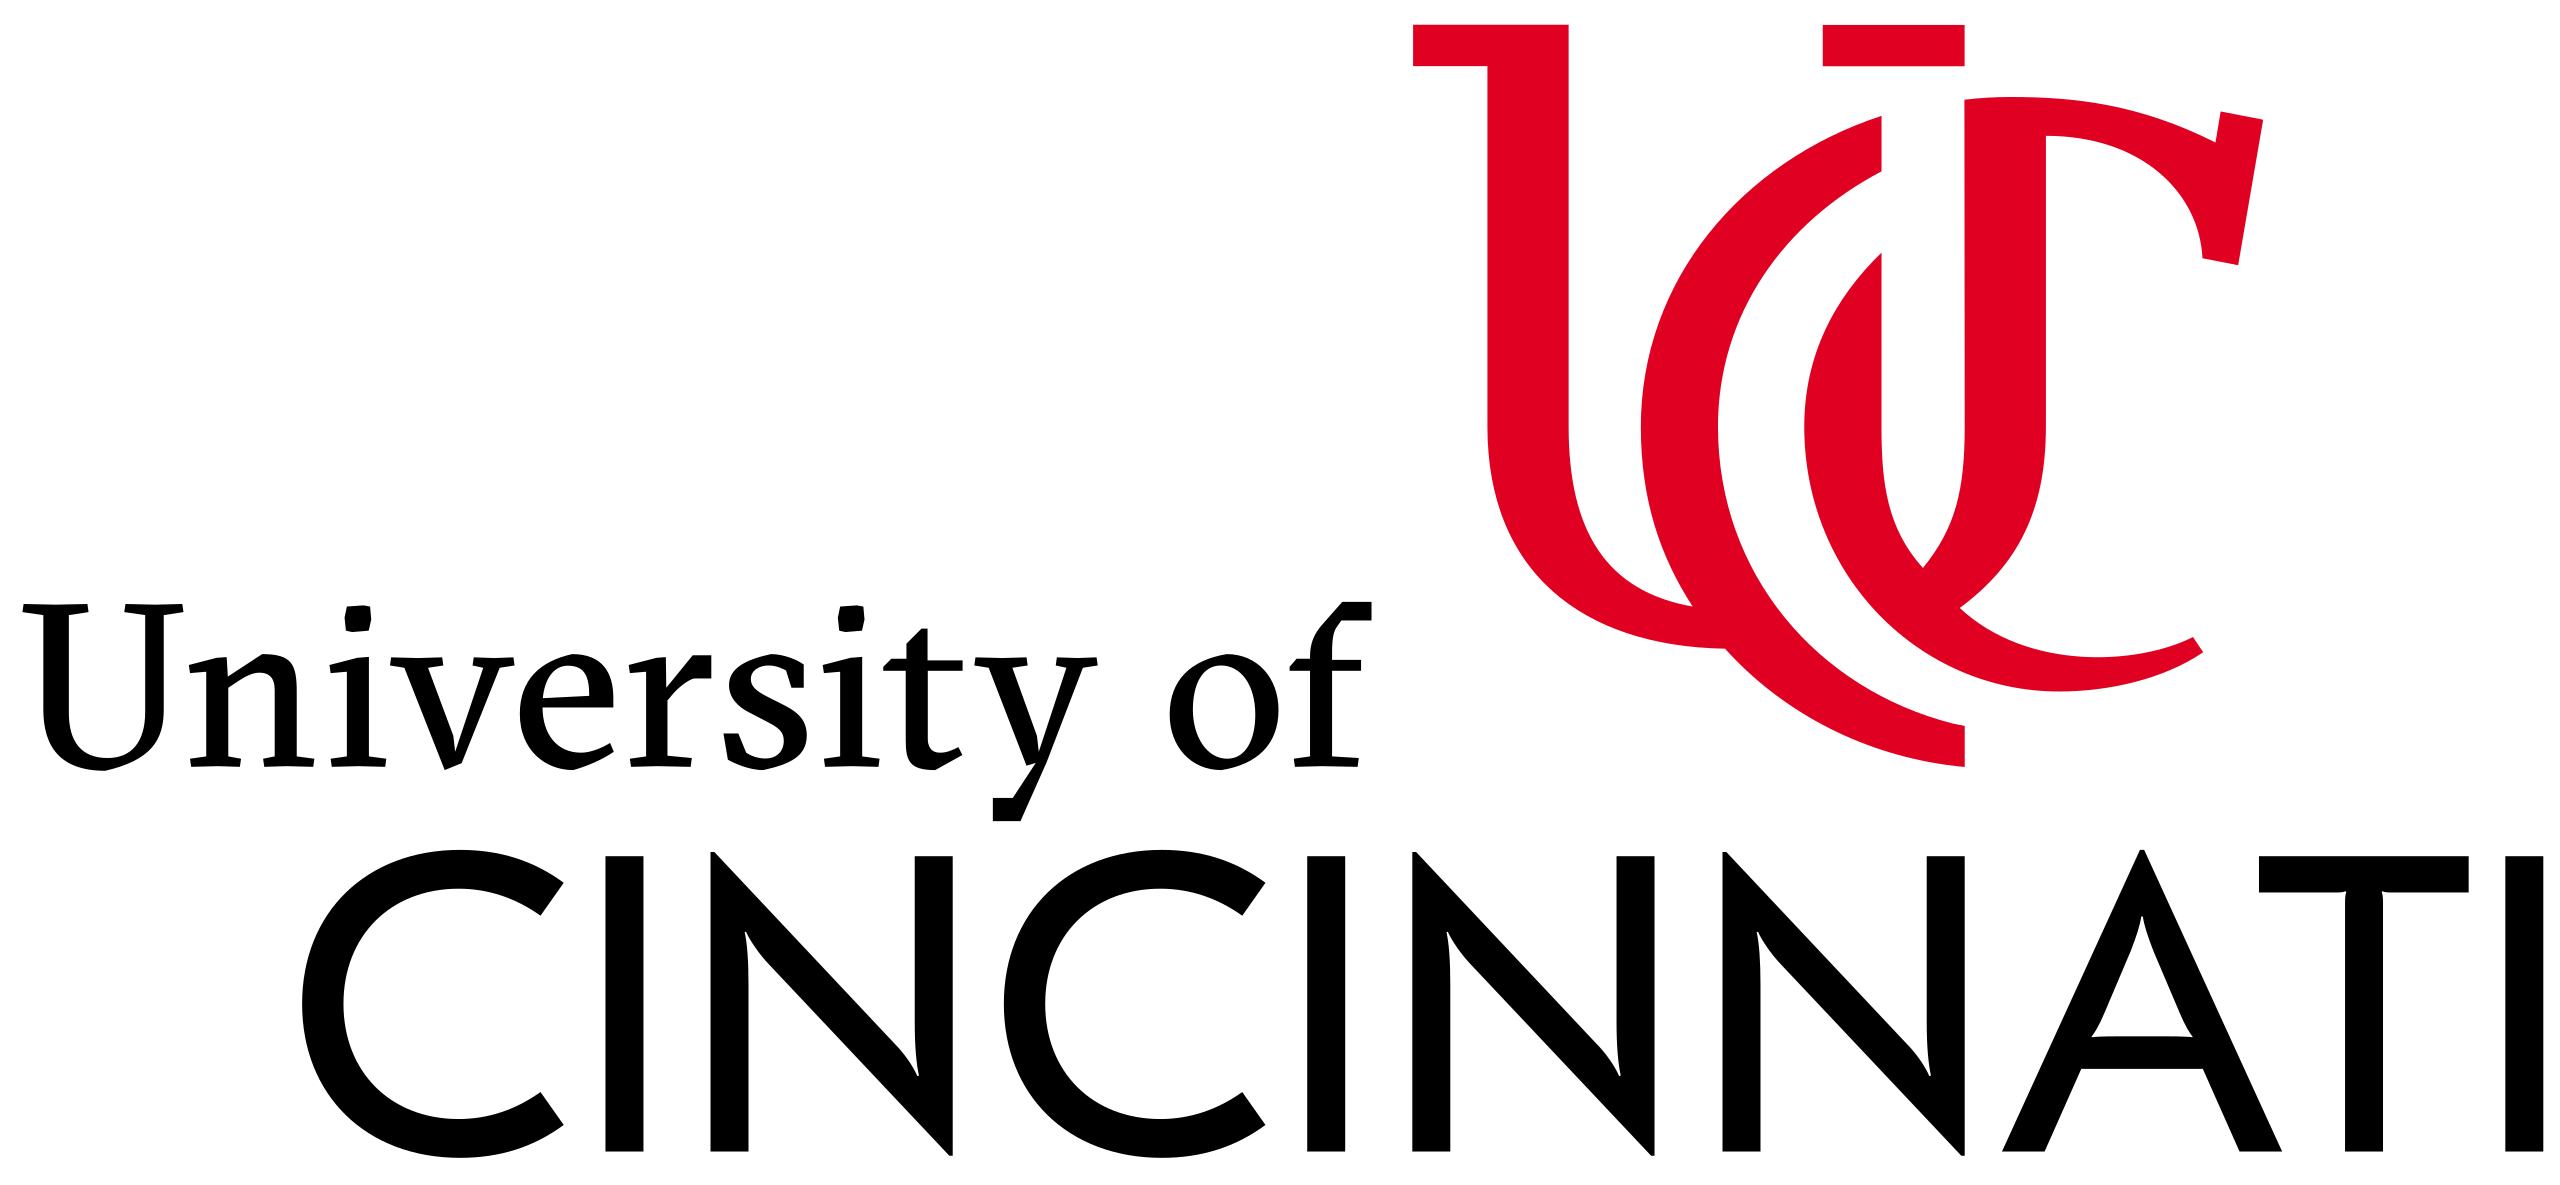 A red and black logo is shown on the side of a wall.